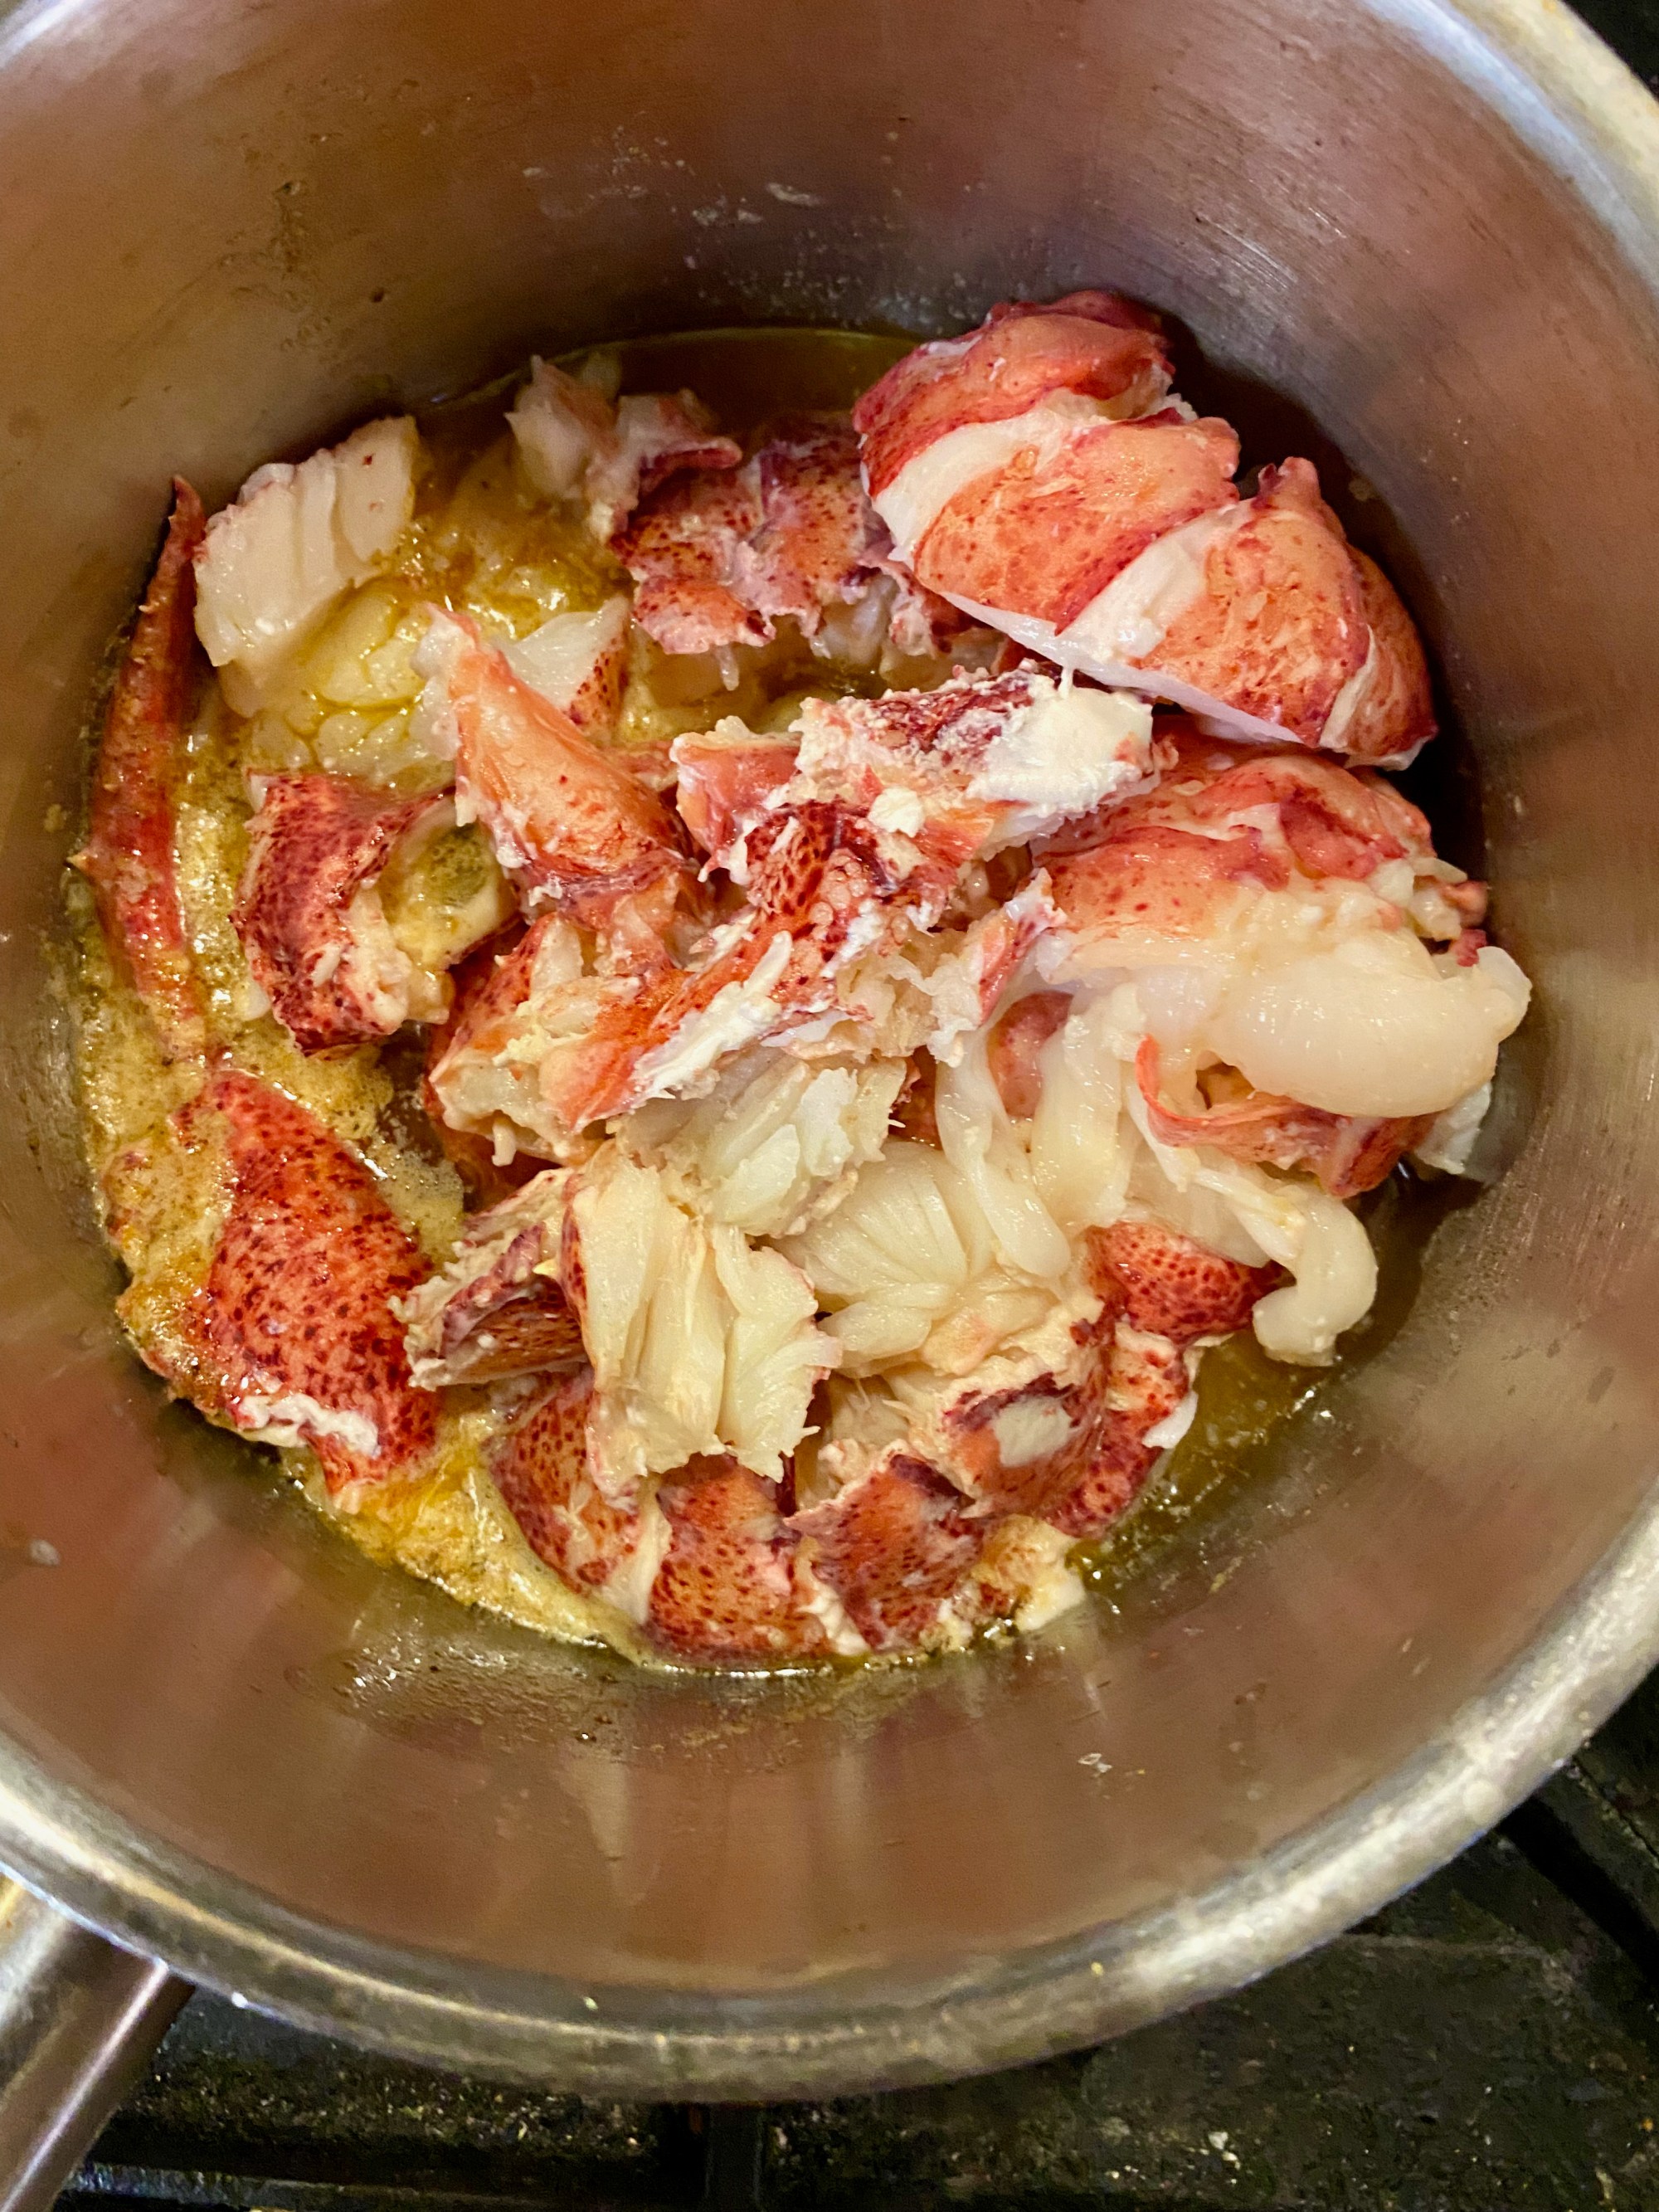 Lobster sitting in butter. Photo by Wes Avila.